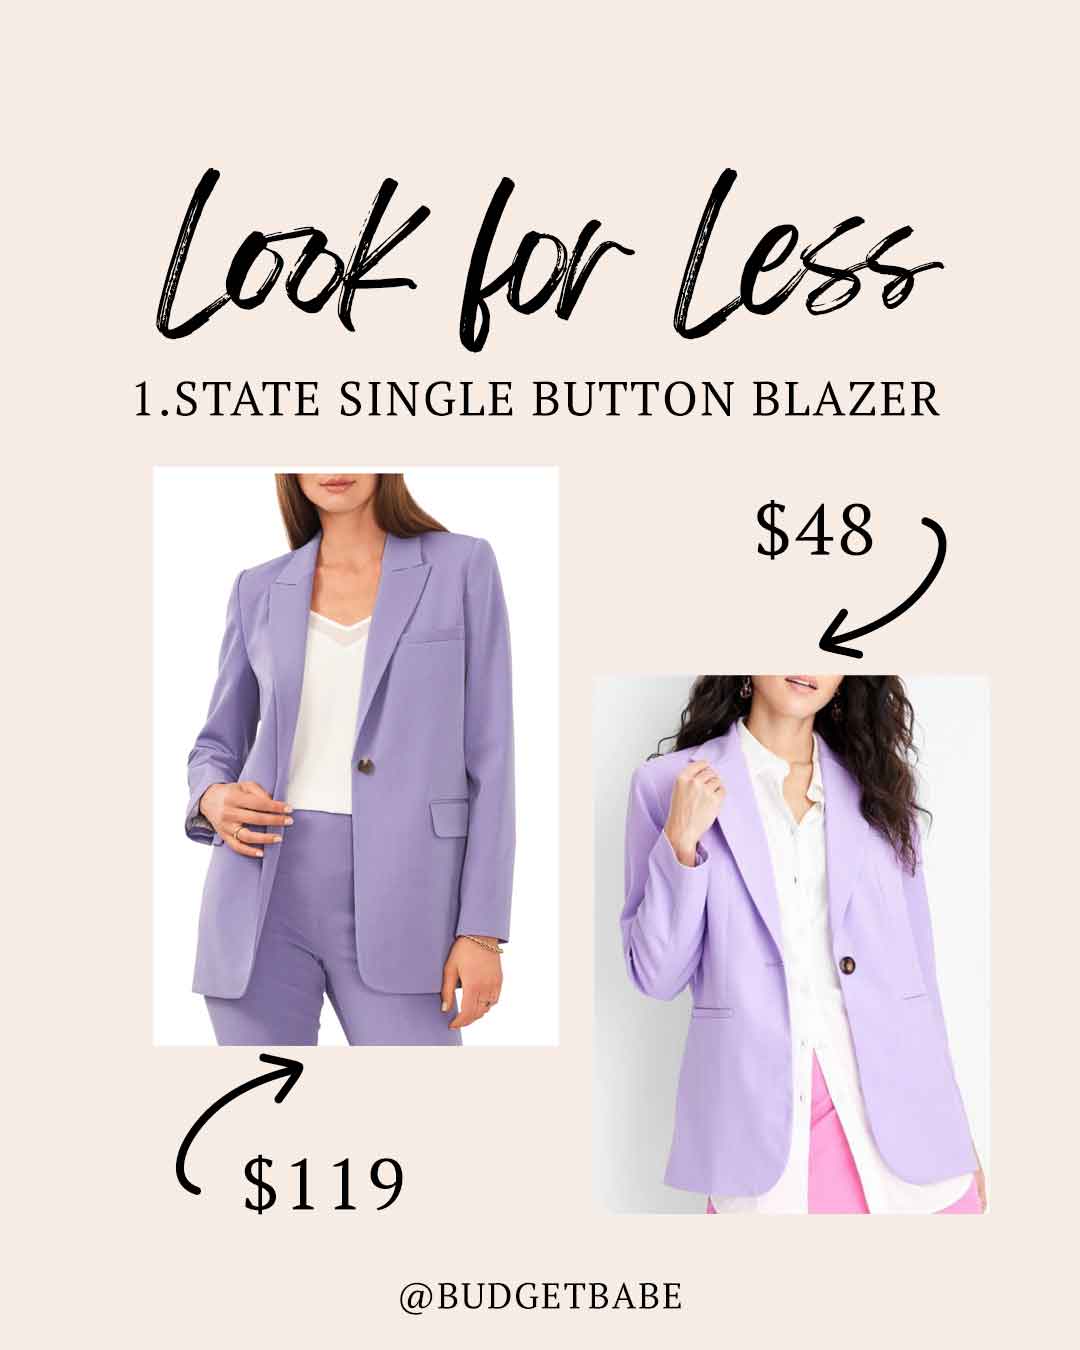 1.State single button blazer look for less at Target